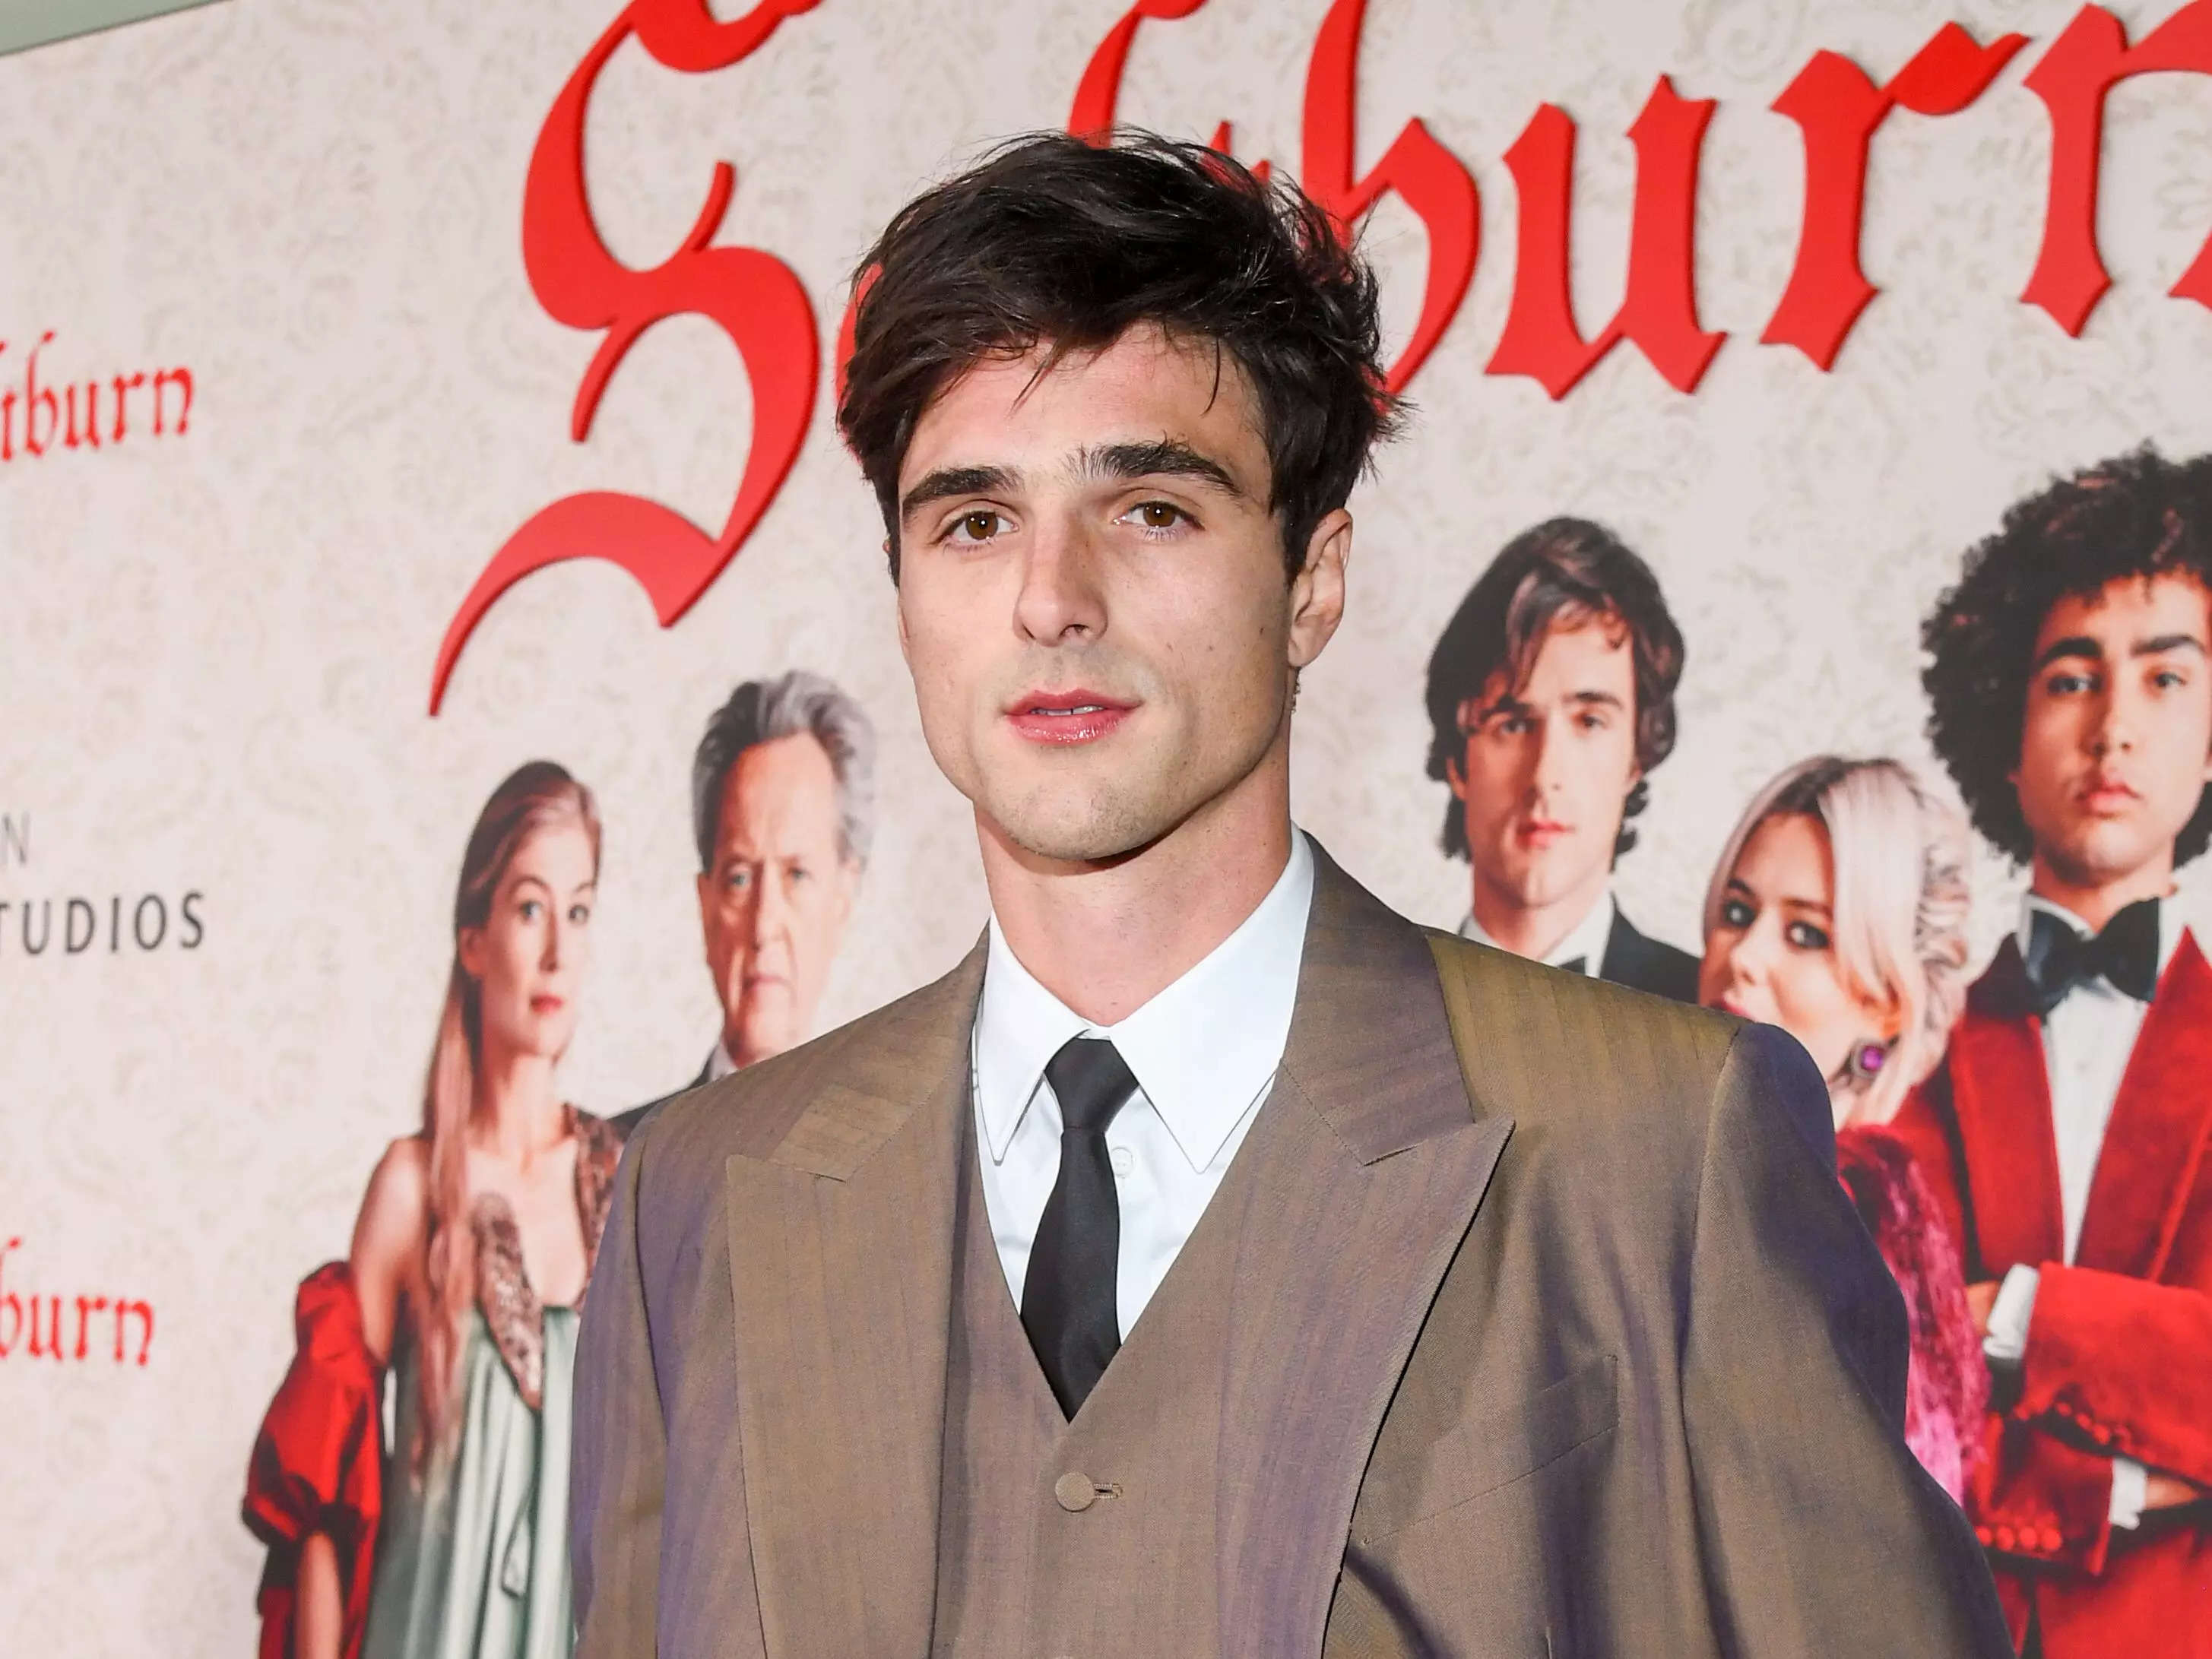 jacob elordi in a brown suit standing on the saltburn red carpet with his hands in his pockets